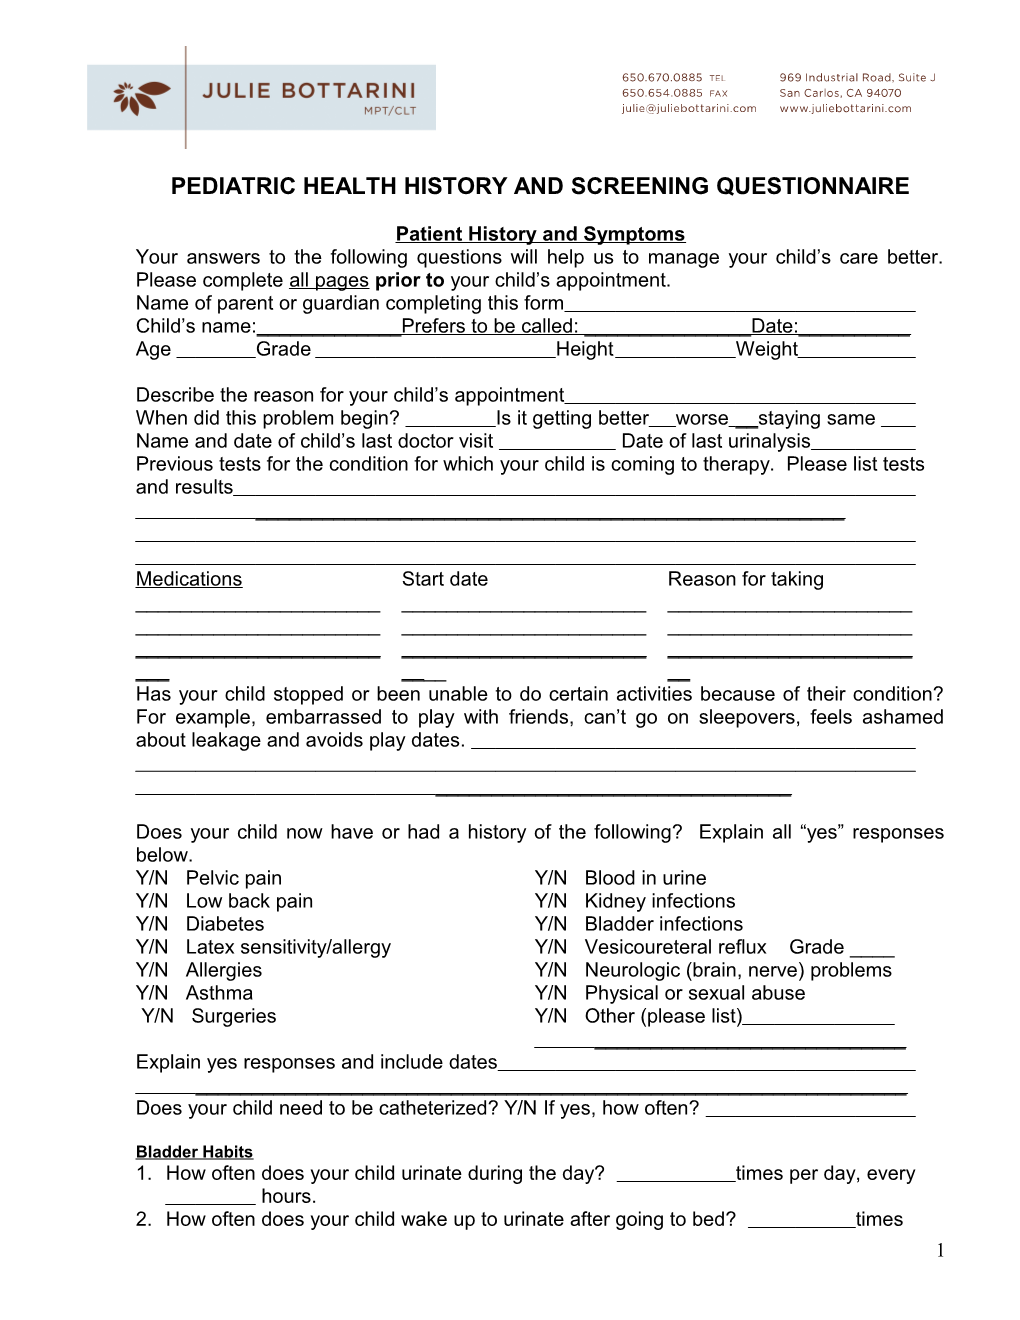 Pediatric Health History and Screening Questionnaire